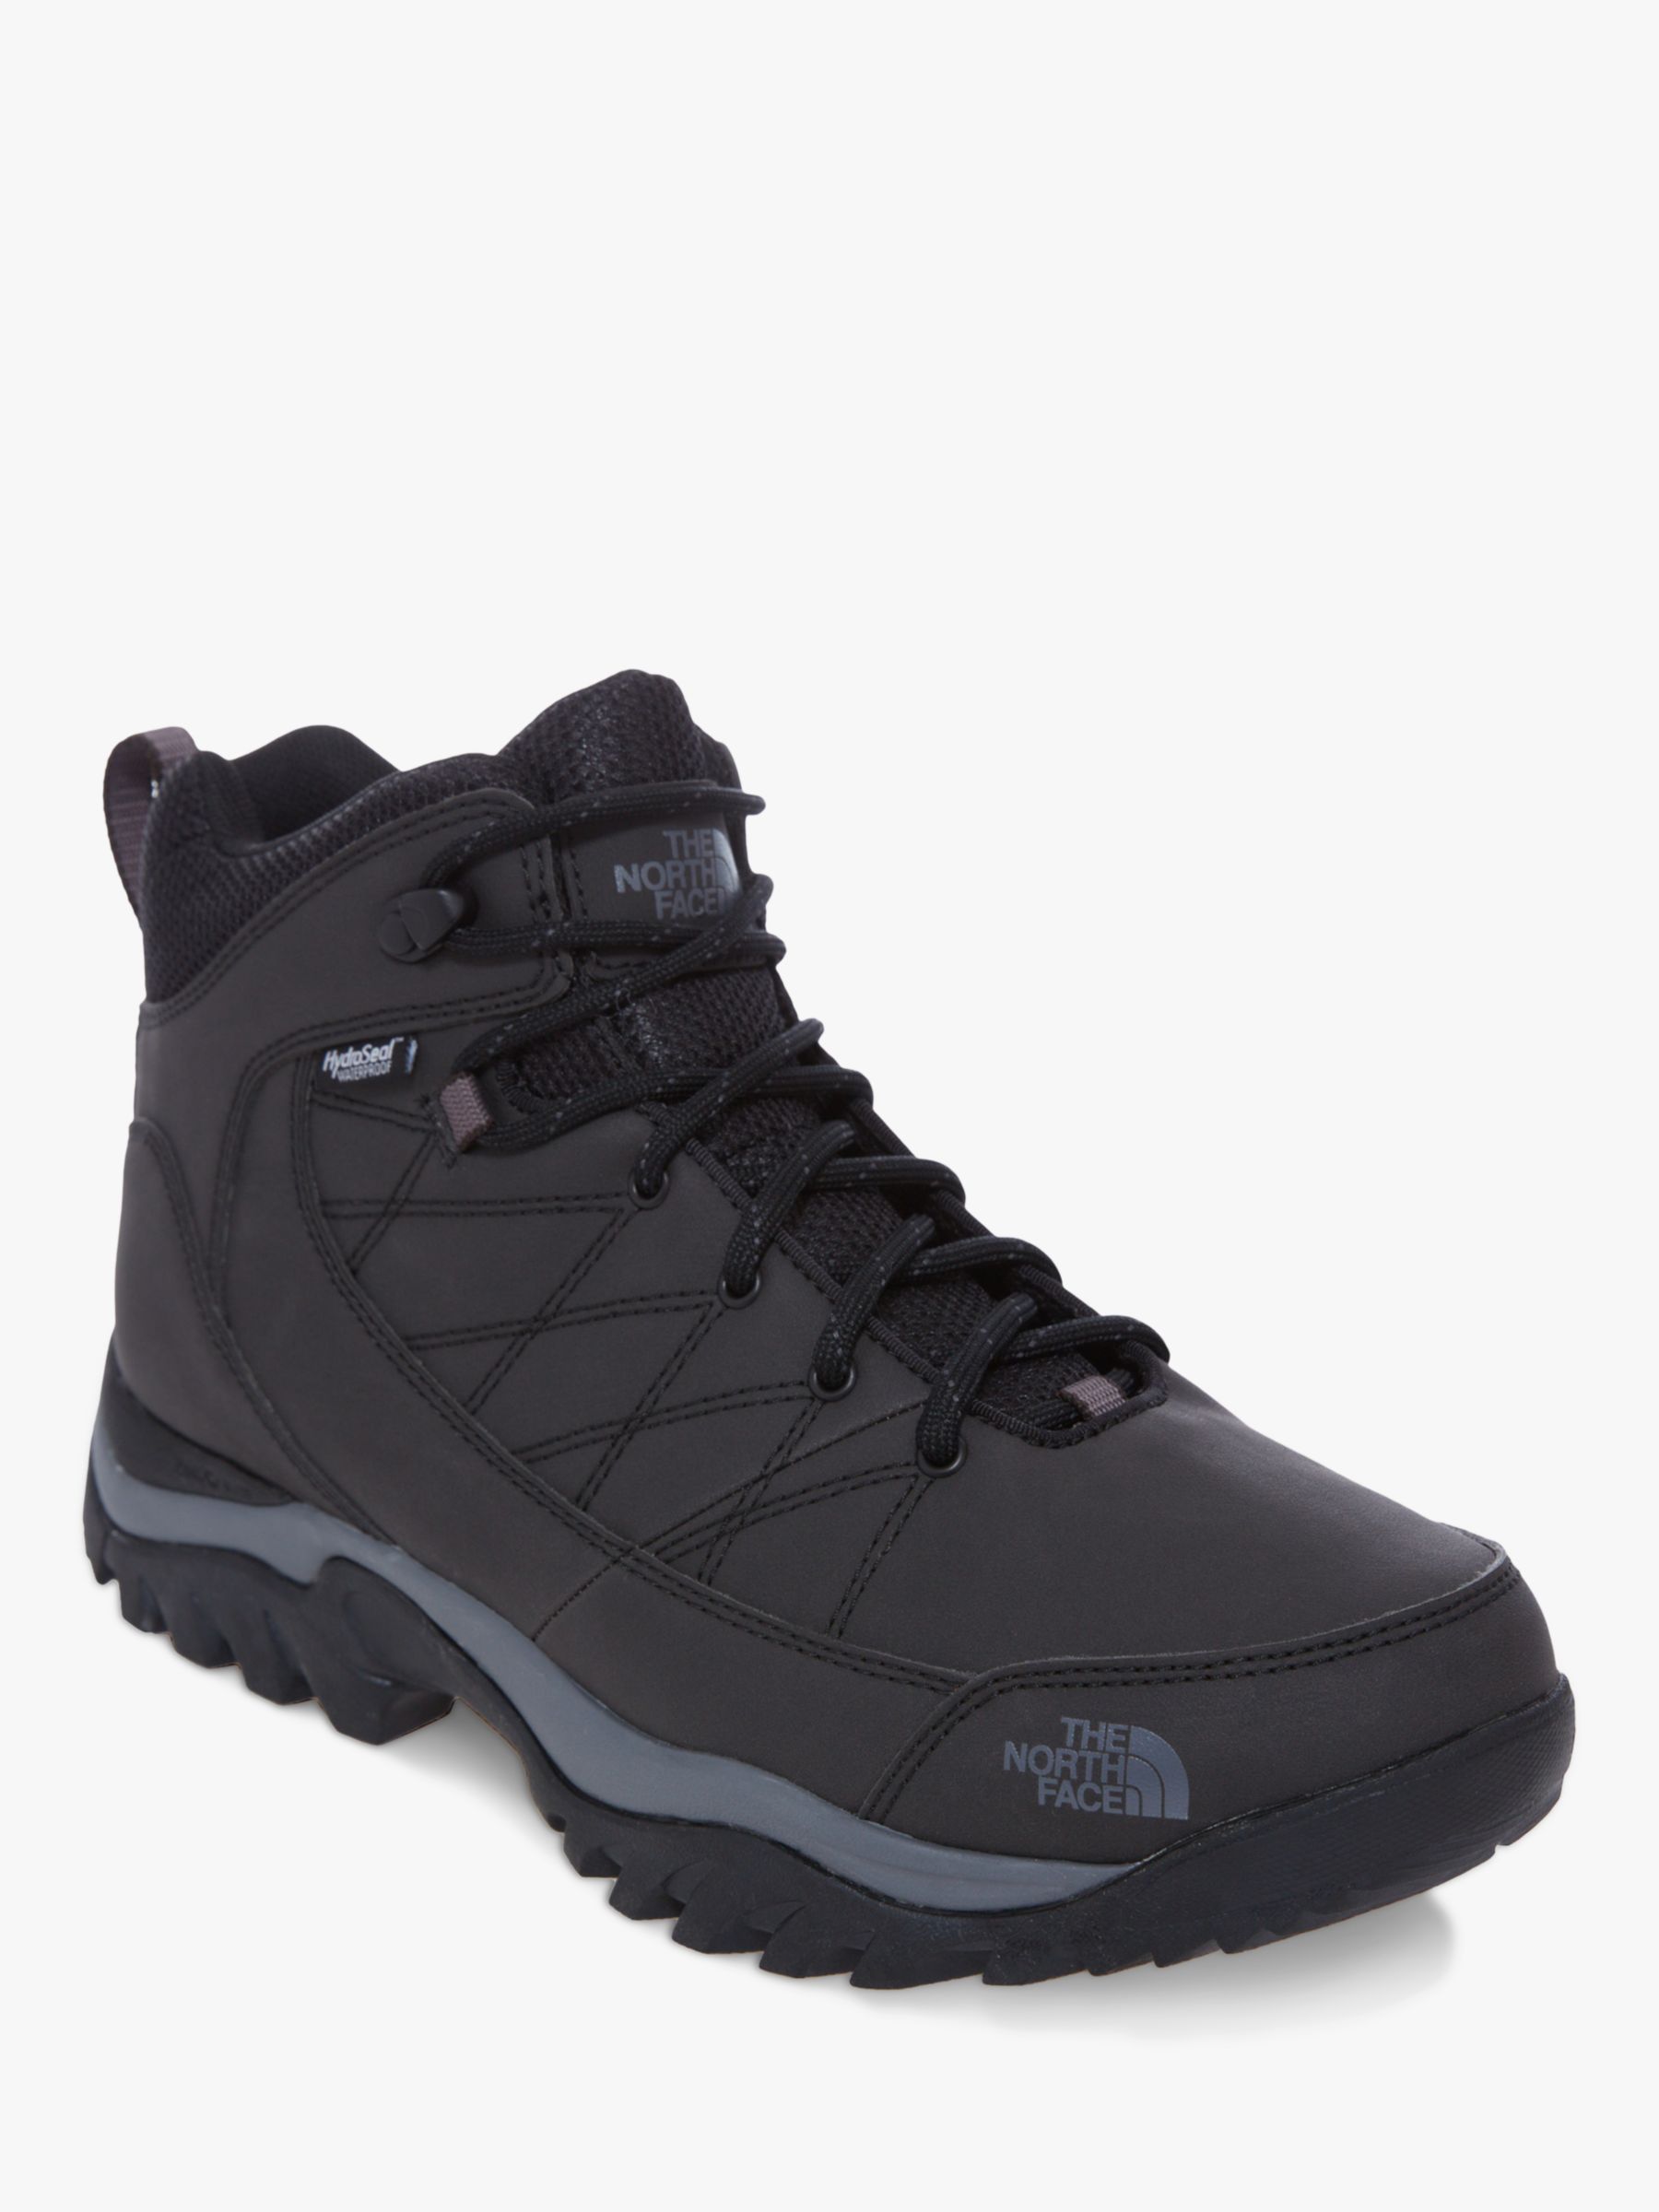 north face storm boots